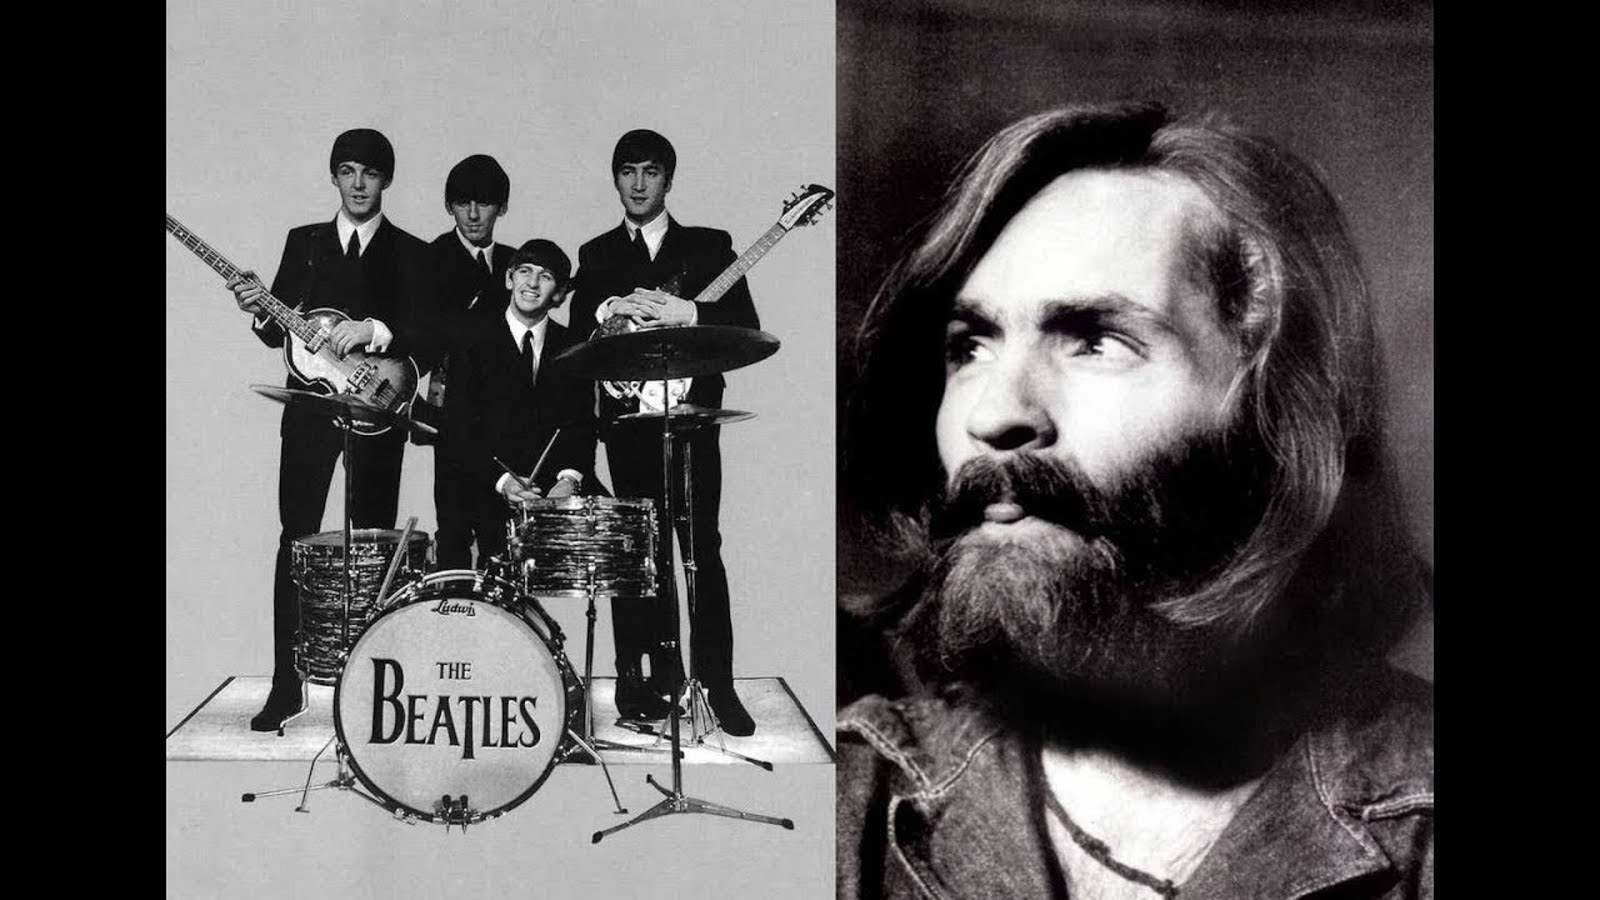 THE BEATLES INVOLVEMENT WITH CHARLES MANSON - "HELTER SKELTER"